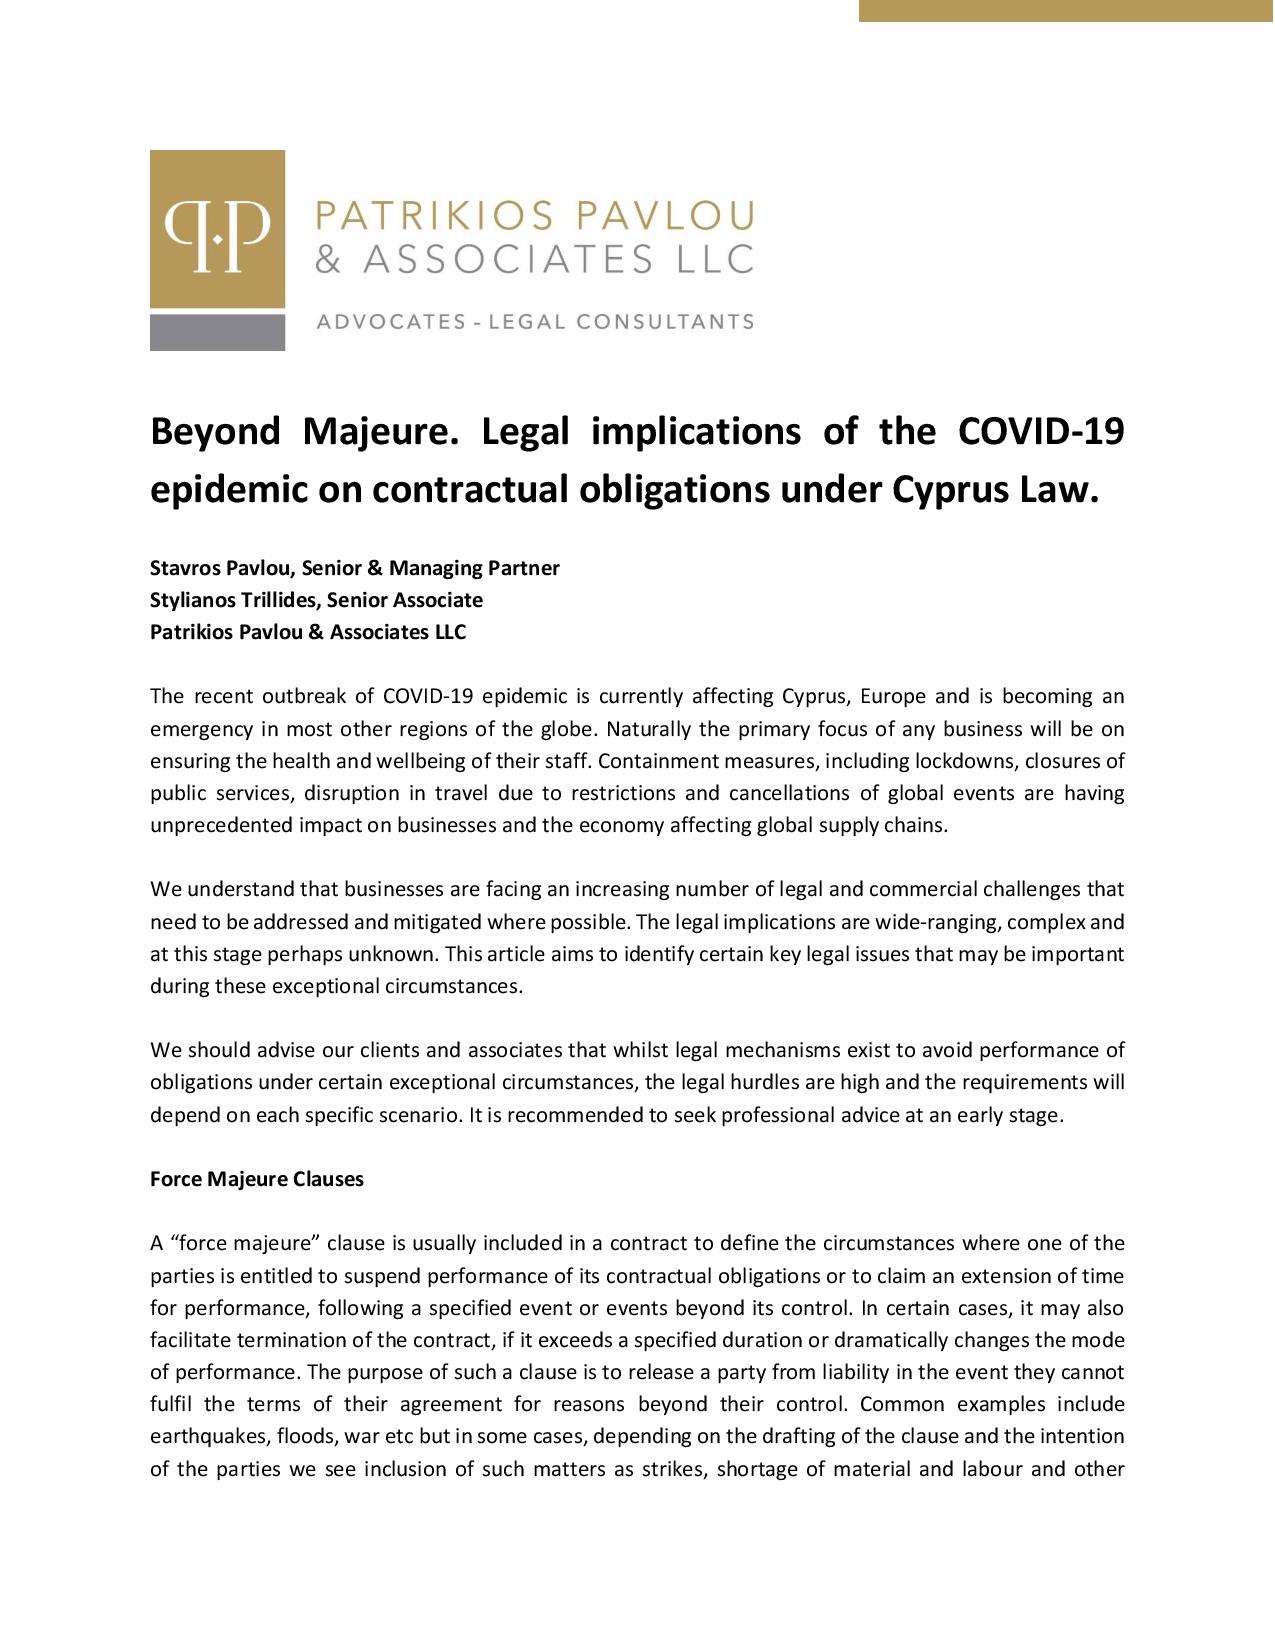 Beyond Majeure. Legal implications of the COVID-19 epidemic on contractual obligations under Cyprus Law.